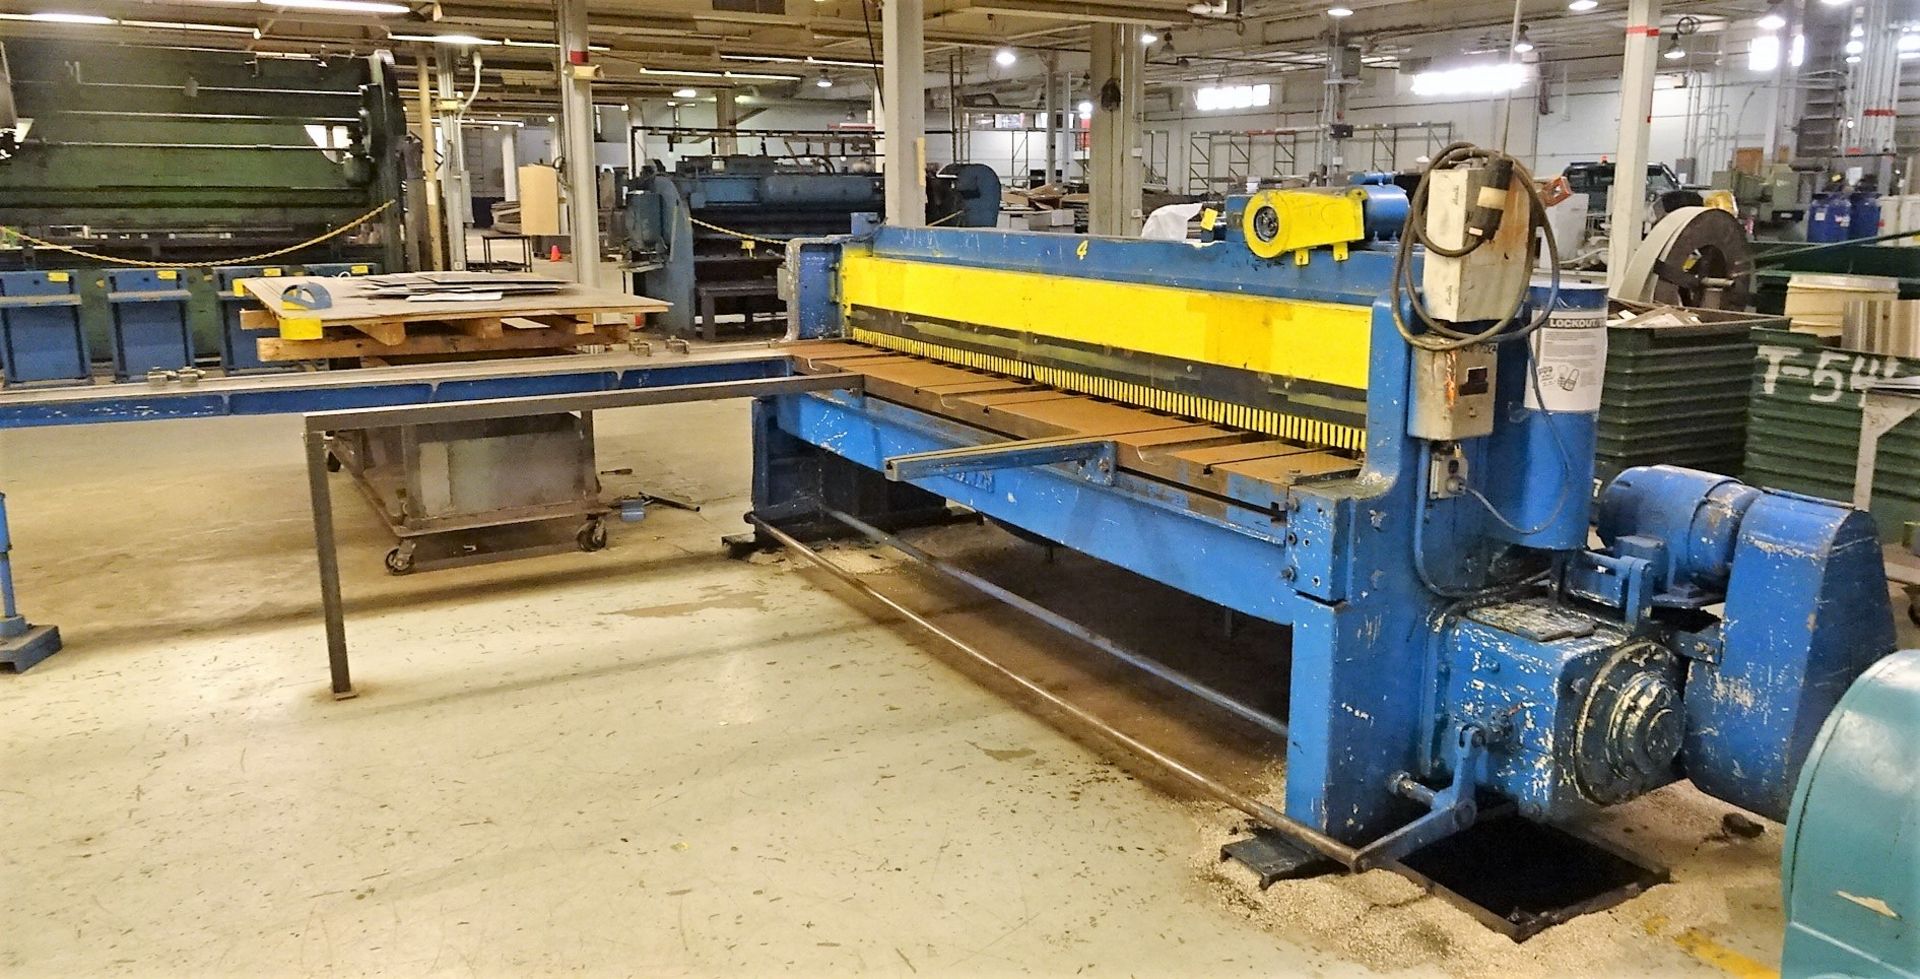 WYSONG 10' MECHANICAL SHEAR, APPROXIMATELY 10 GAUGE CAPACITY, SQUARING ARM, FRONT POWERED POWER BACK - Image 2 of 3